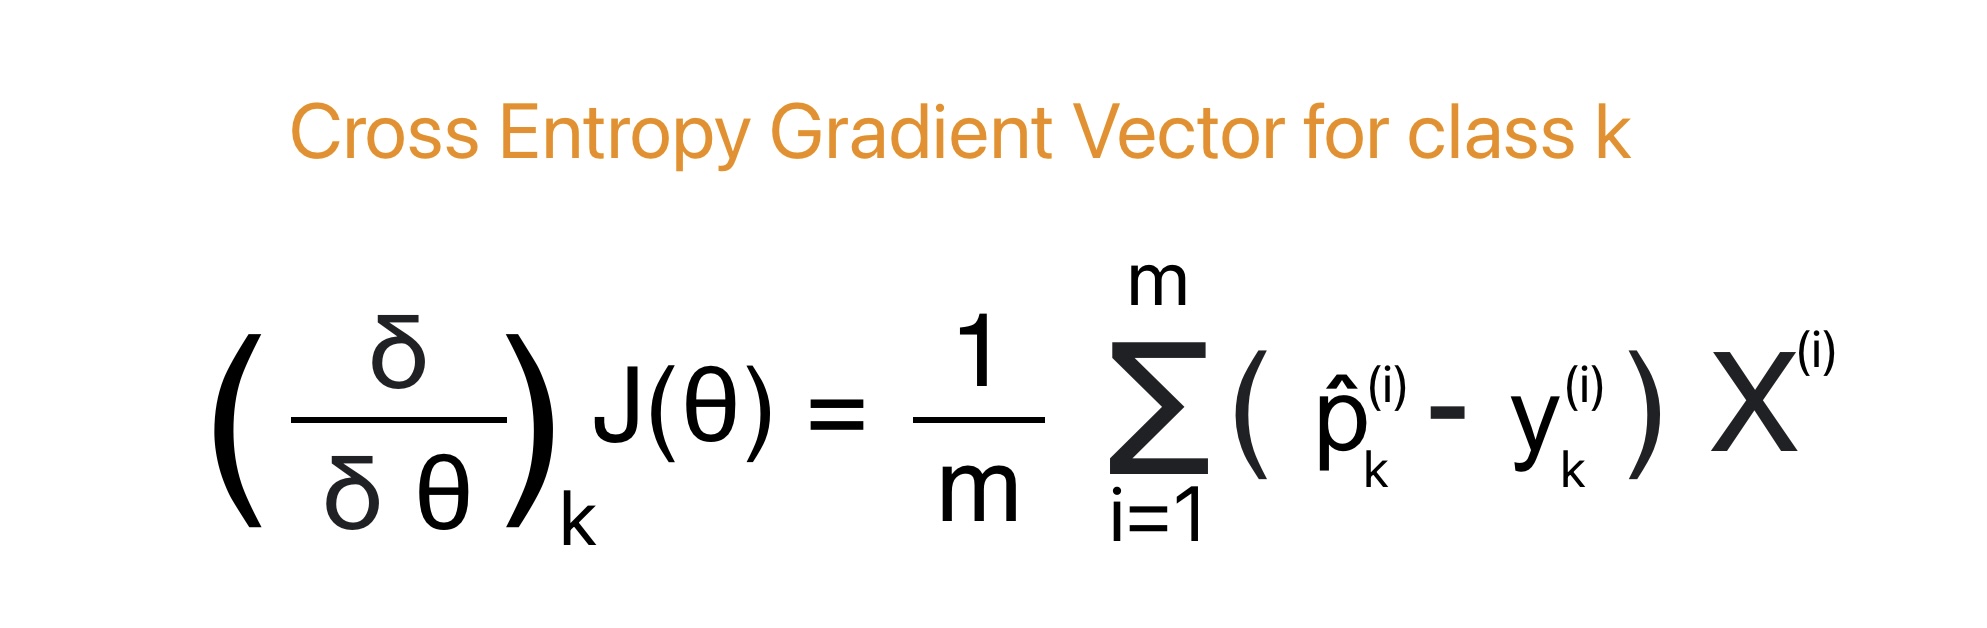 This image shows the Cross Entropy Gradient Vector for softmax regression in machine learning.